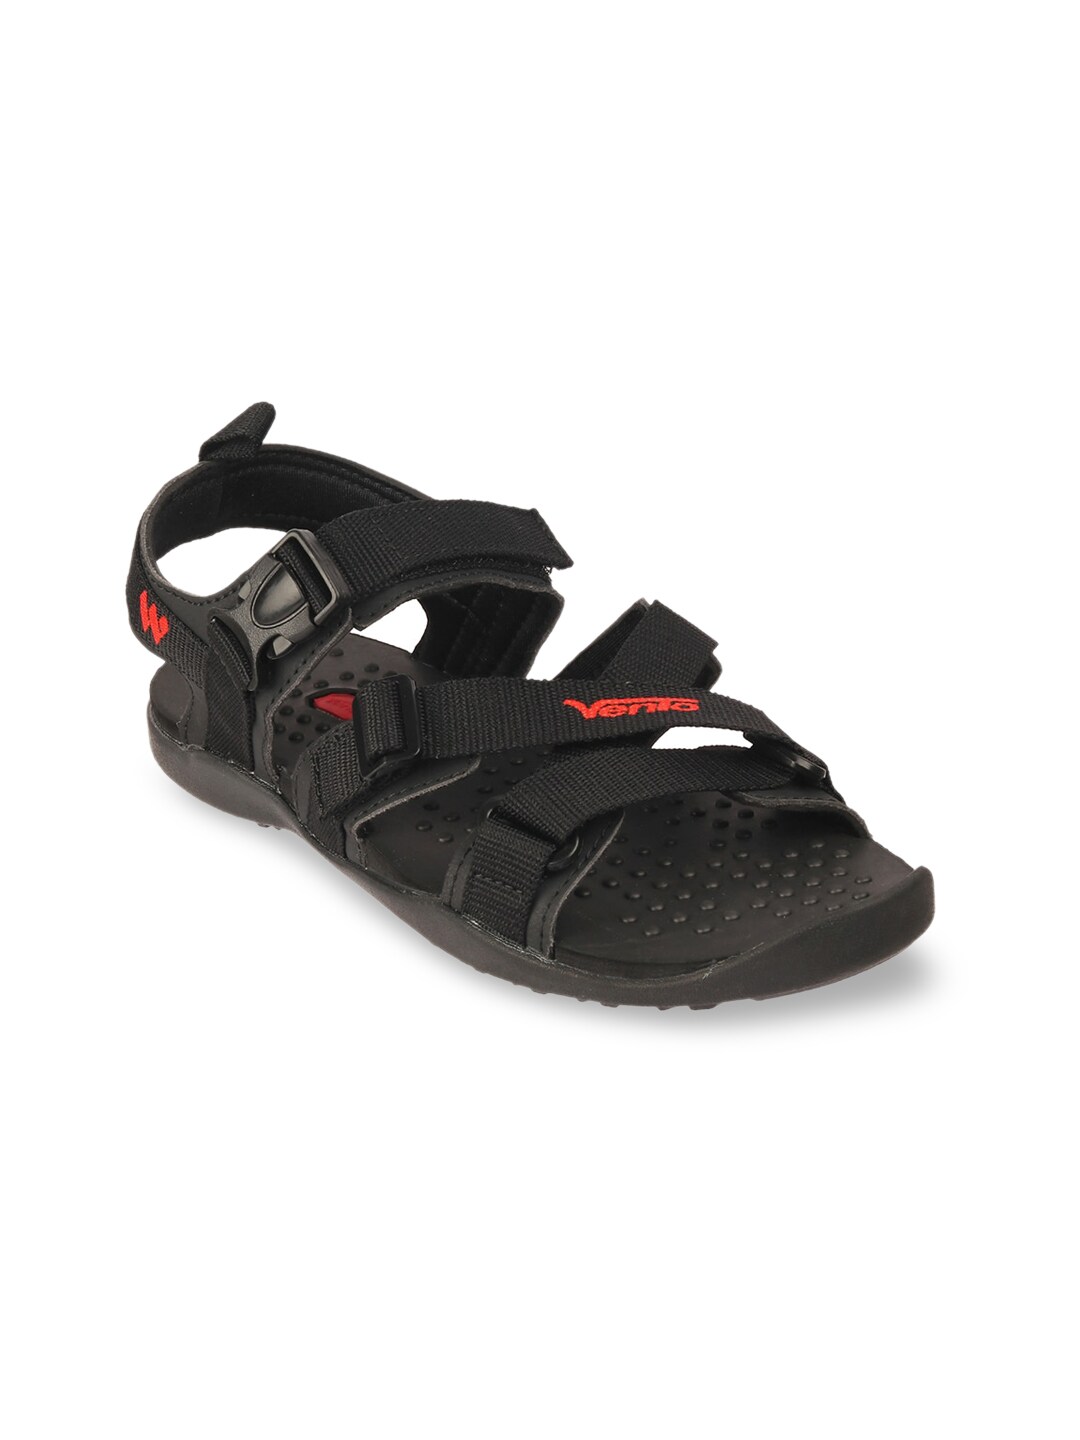 Vento Unisex Black & Red Solid Sports Sandal Price in India